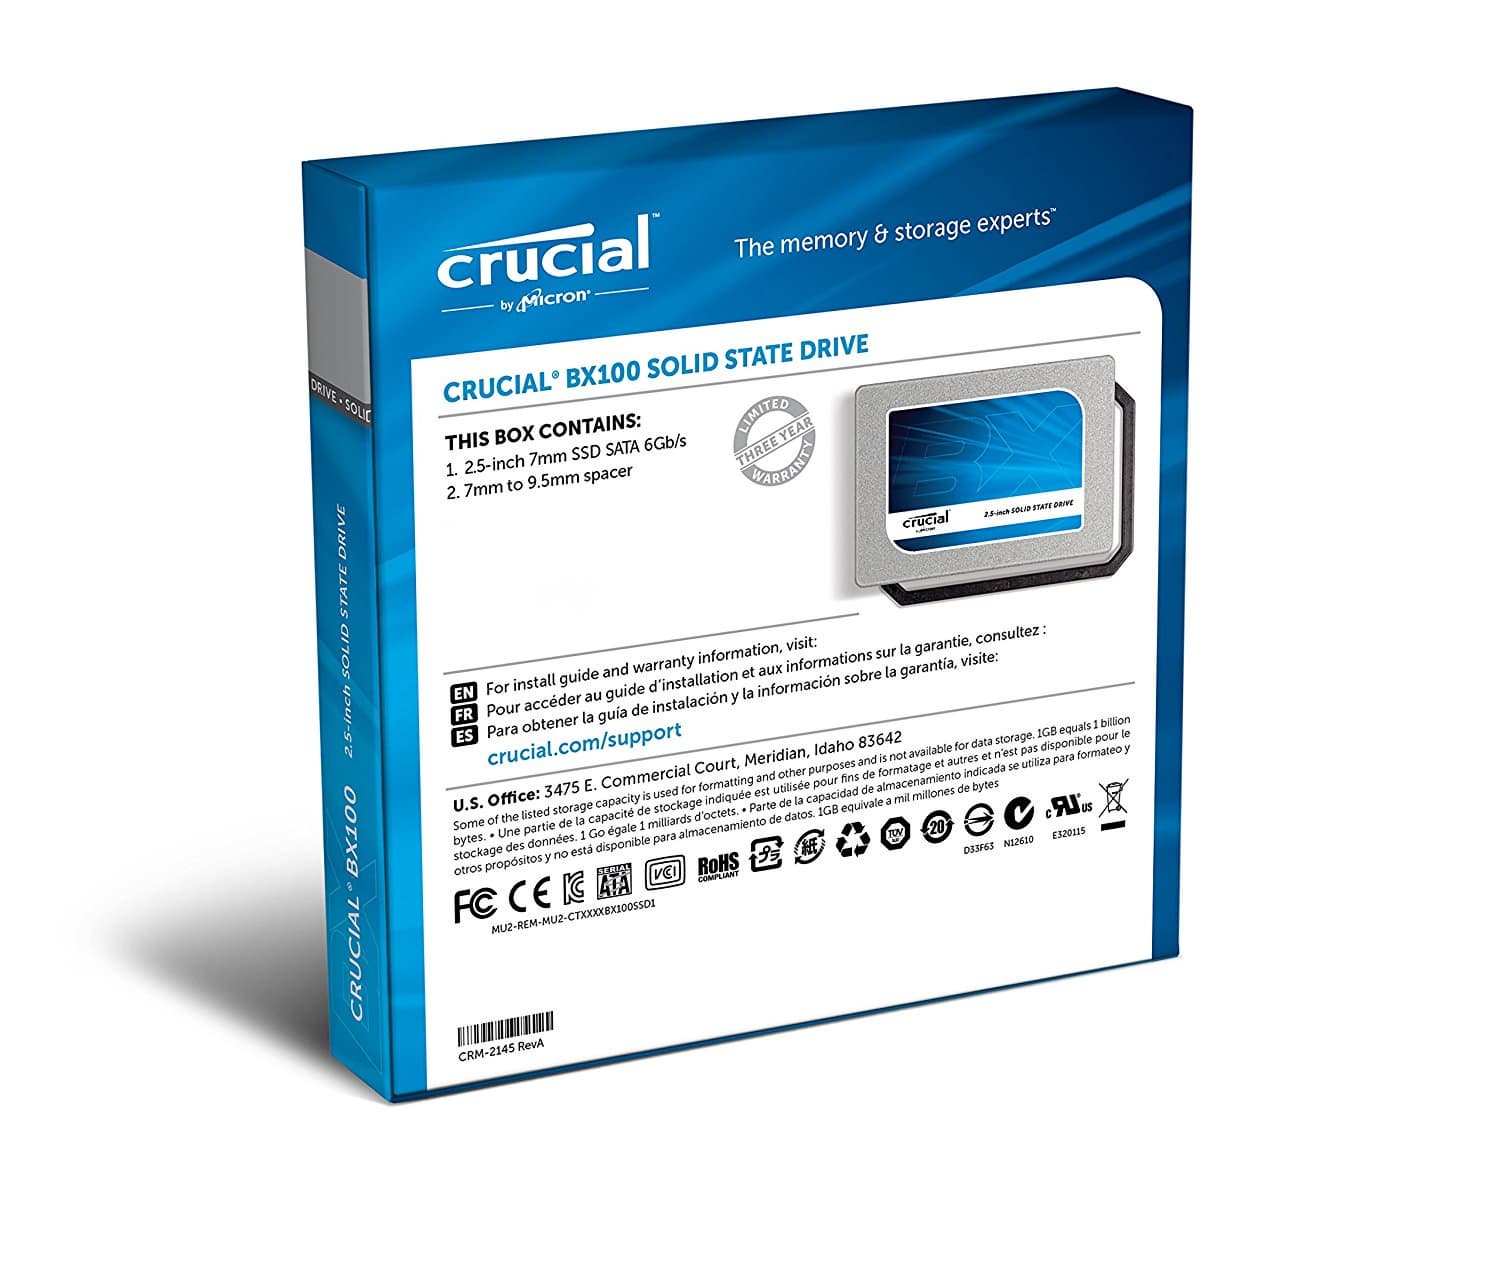 Crucial BX100 500GB SATA 2_5 Inch Internal Solid State Drive